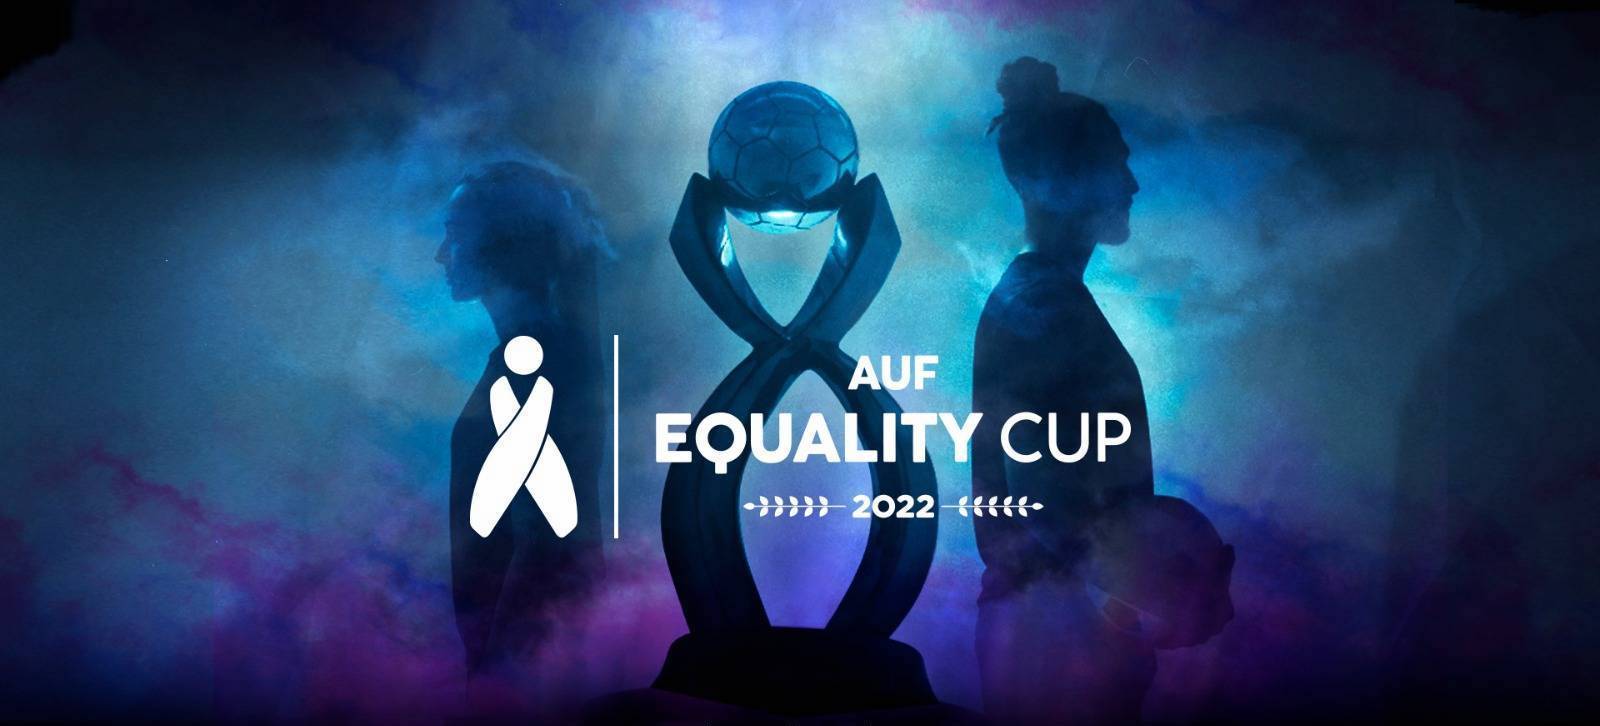 AUF Equality Cup trophy